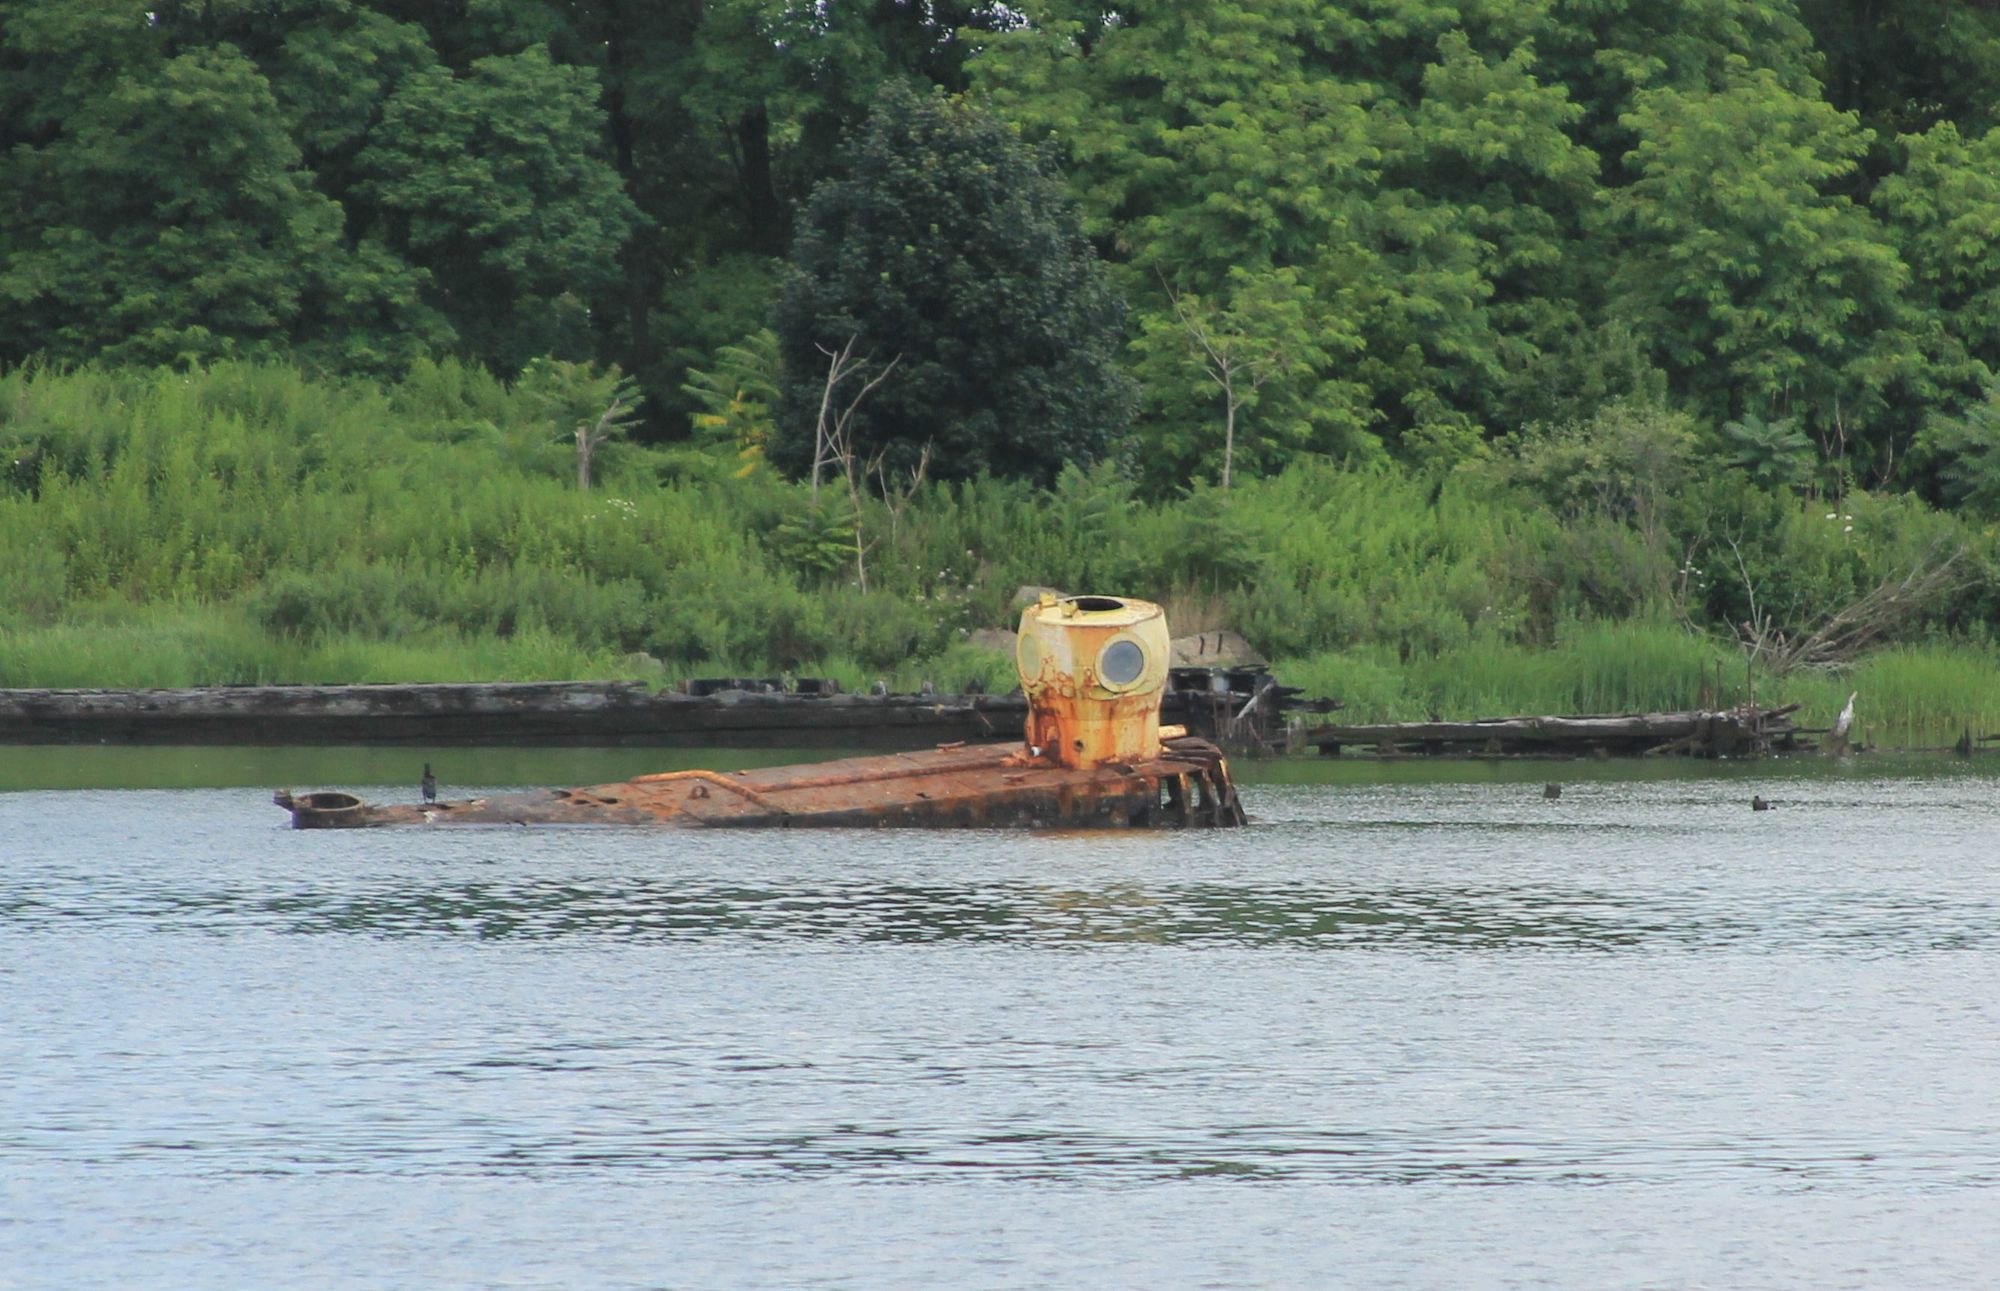 The Yellow Submarine of Coney Island Creek Rusts In Peace